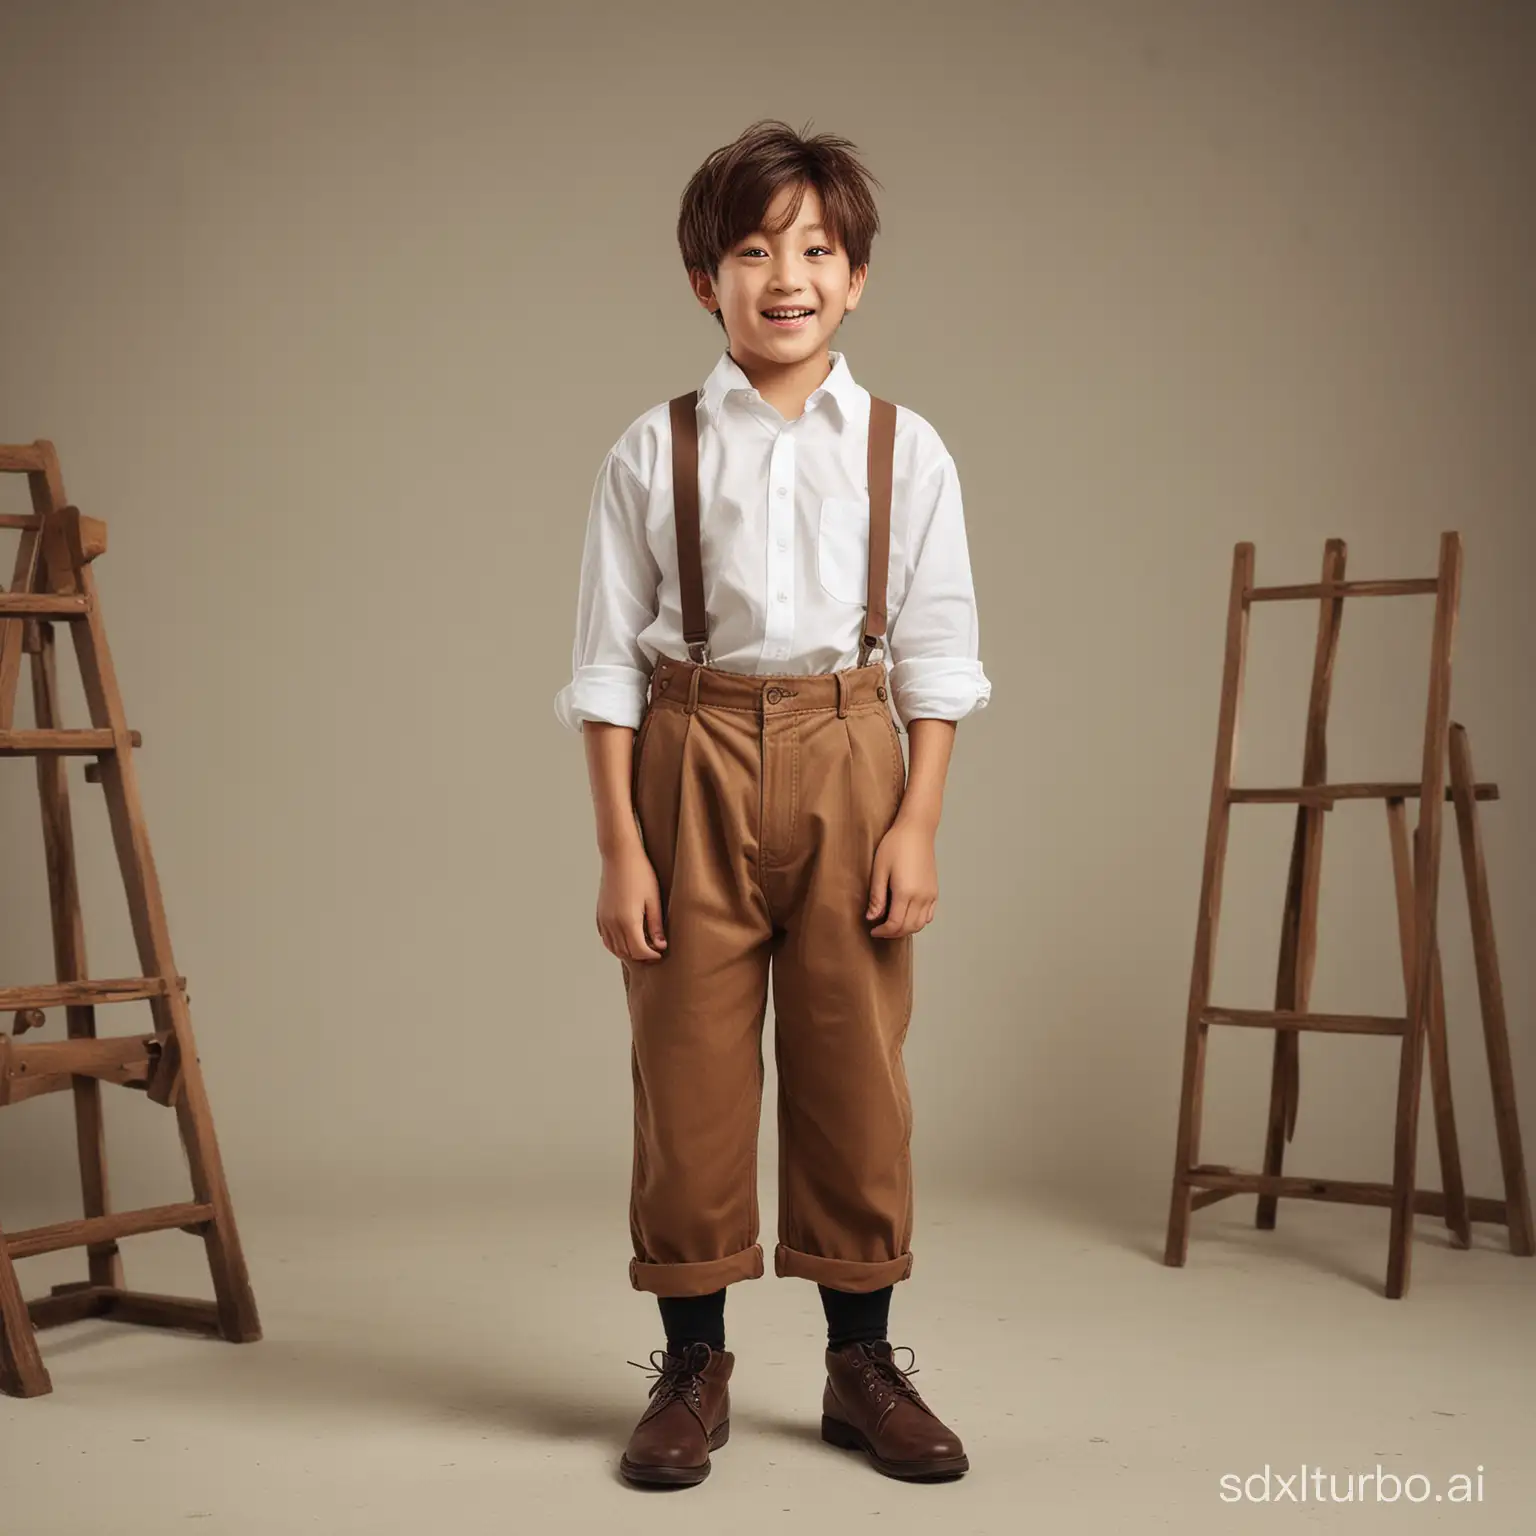 a five years old boy, with Jung Kook face, nice hair style, a lots of hair in brown color, casual cloth, white shirt, smile, look at camera, full body in the photo,don't cut body in half, Cinematic photography, (bokeh magic), classroom, runes, toxic punk, (ultra detailed), (rule of thirds), mind-boggling spectacle, assemblage of absurd elements clamors for attention.converge in a baffling configuration, constructing an image that defies coherence.  reality takes a comically perplexing plunge into utter absurdity. center frame, full head and body in the frame